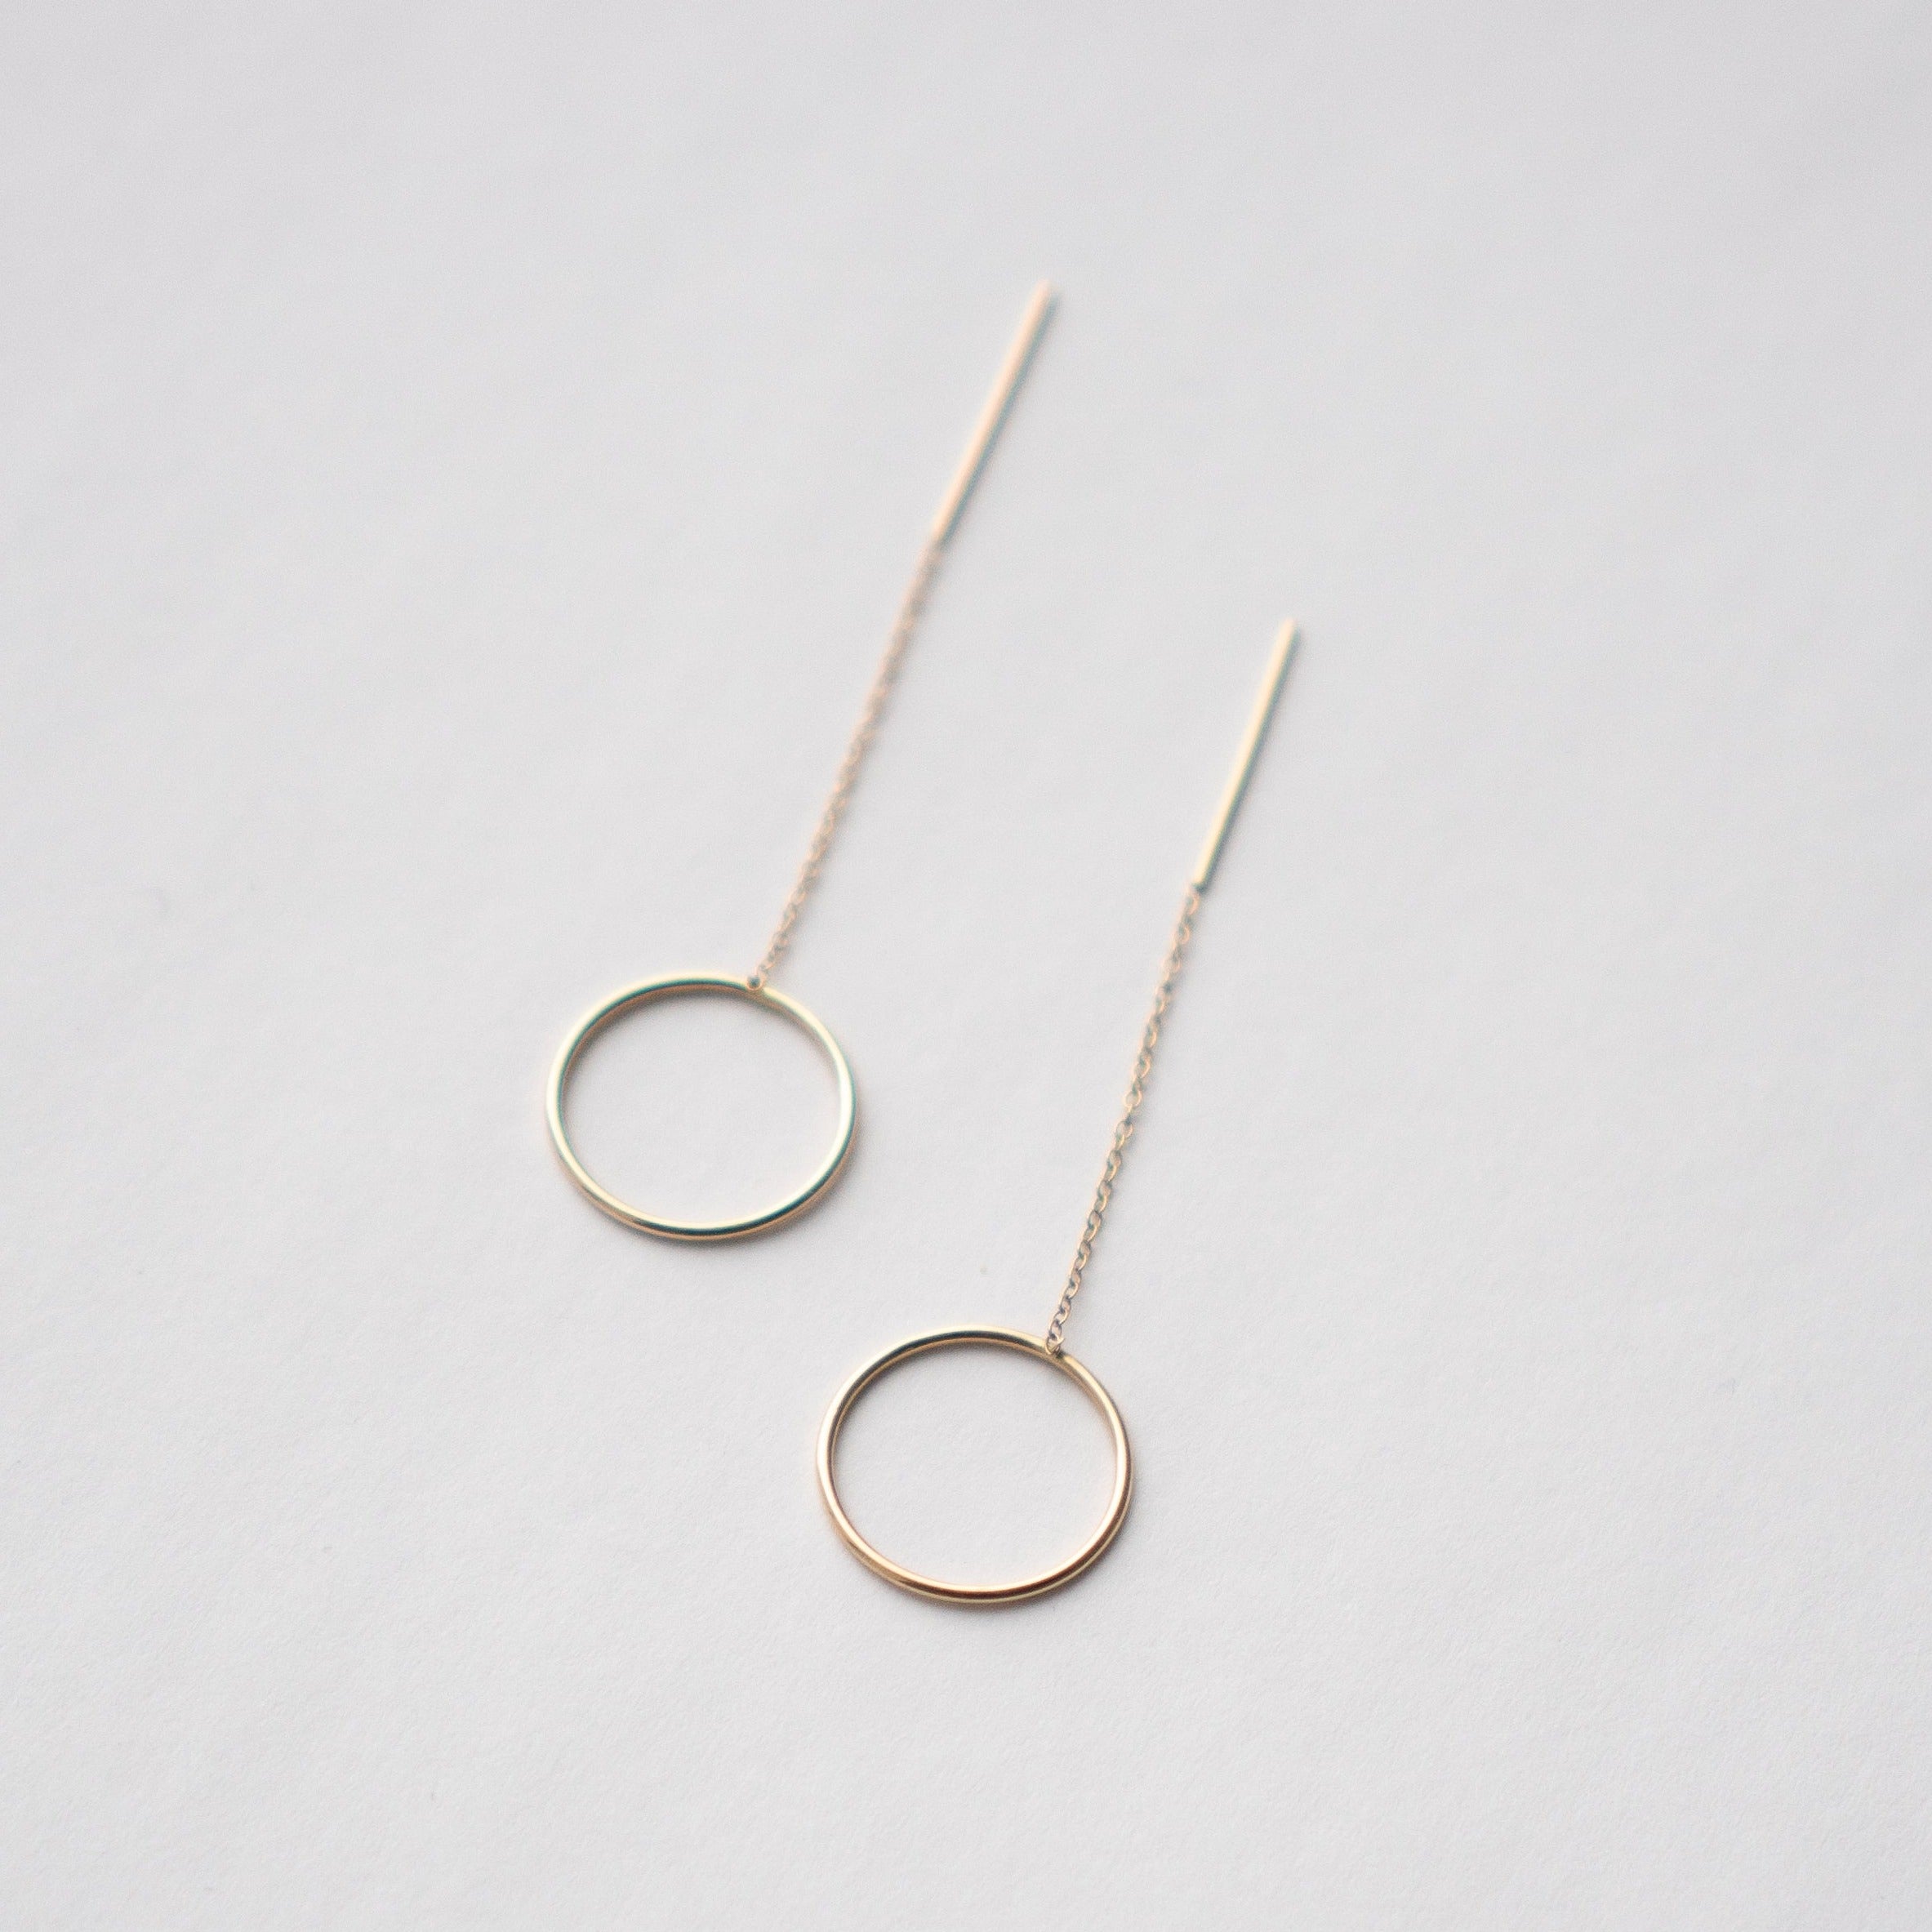 Minimal Lili Pull-Through Circle earrings in 14k yellow gold by SHW Fine Jewelry in NYC